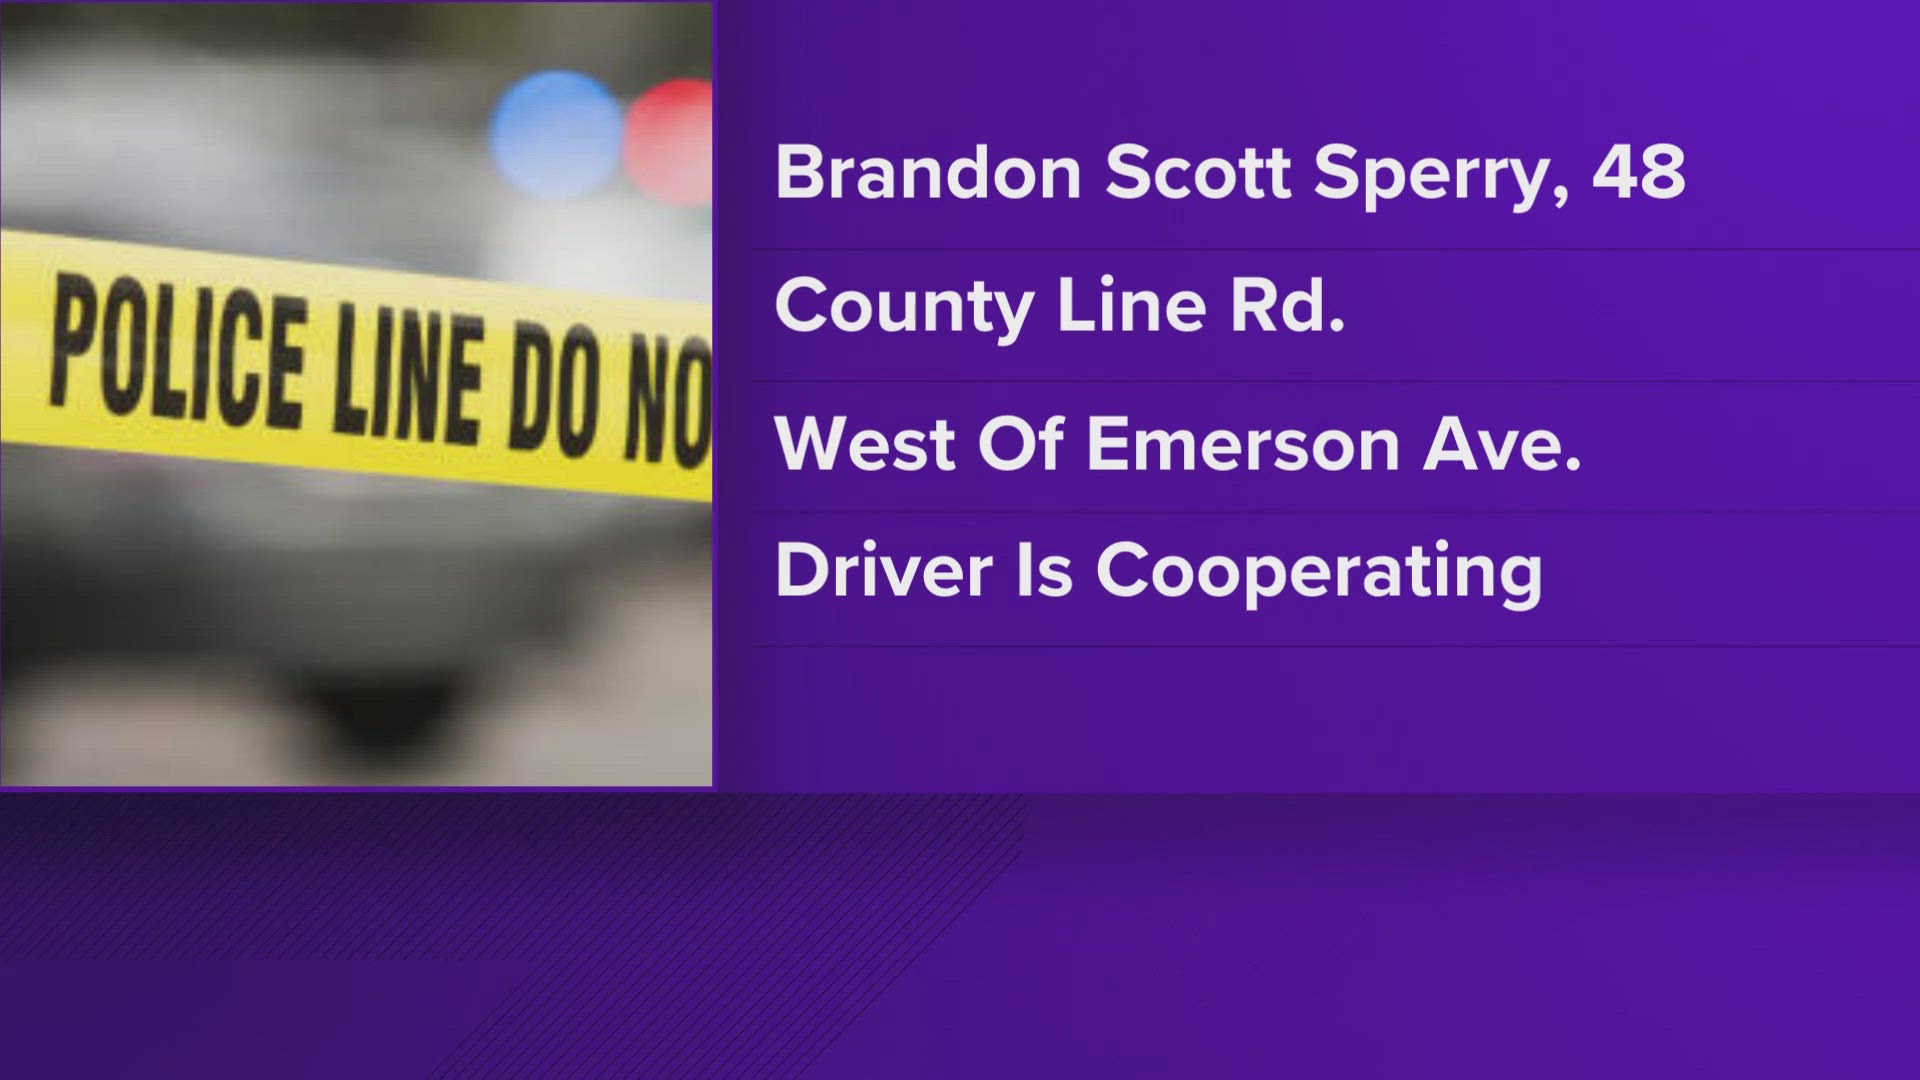 The coroner's office identified Brandon Scott Sperry as the man who was killed last Monday